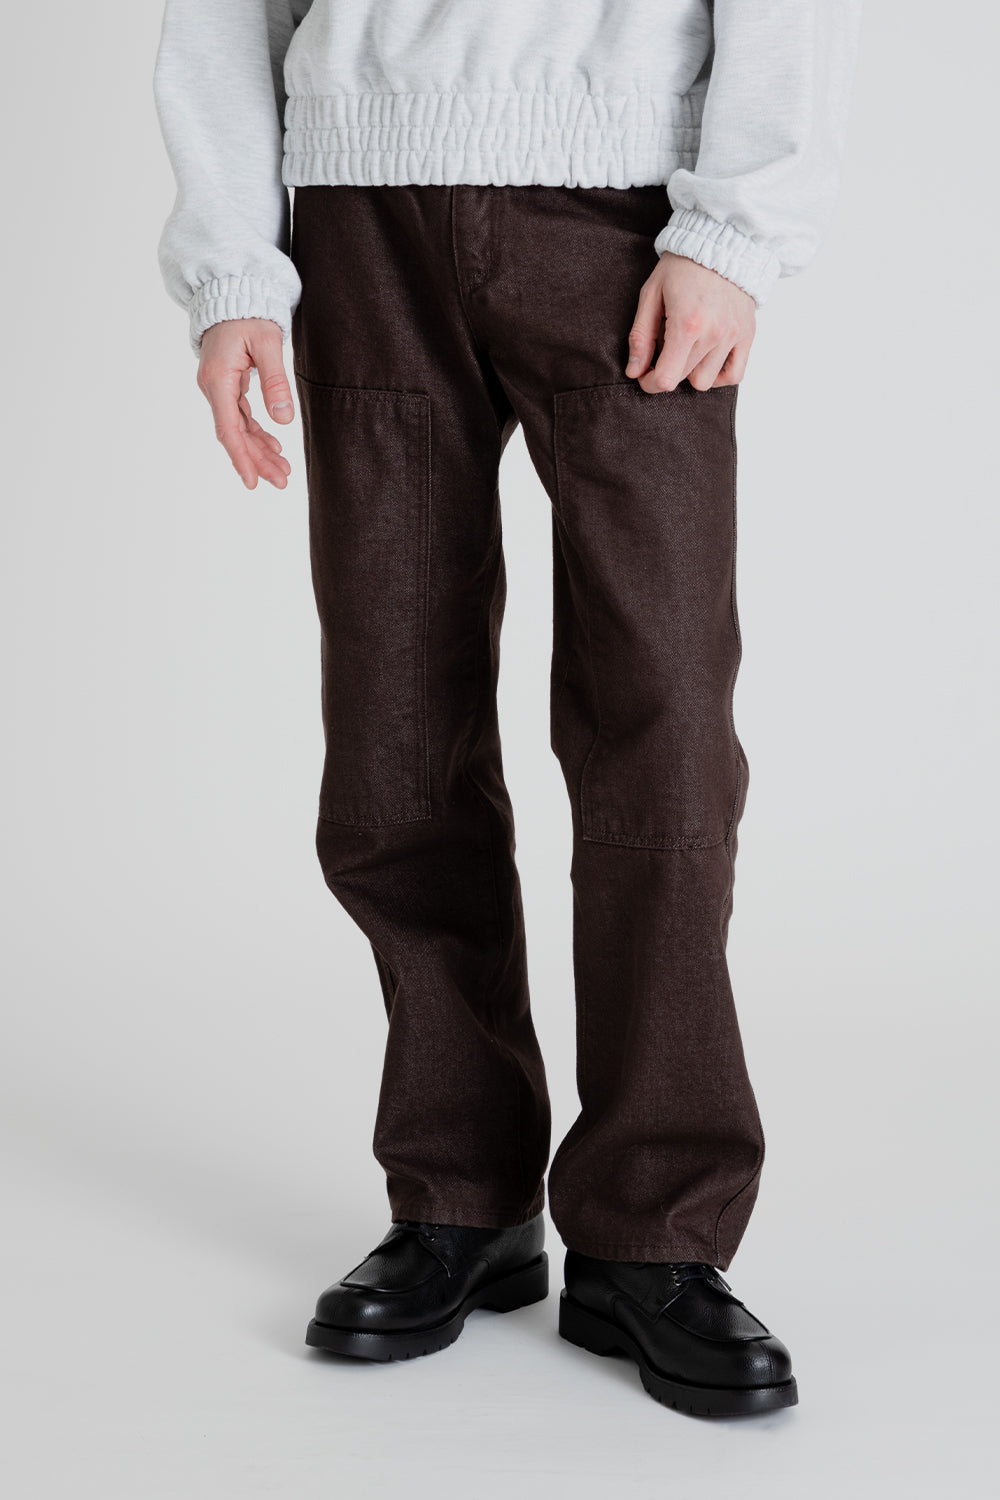 Frizmworks Corduroy Comfort Two Tuck Pants in Olive | Wallace